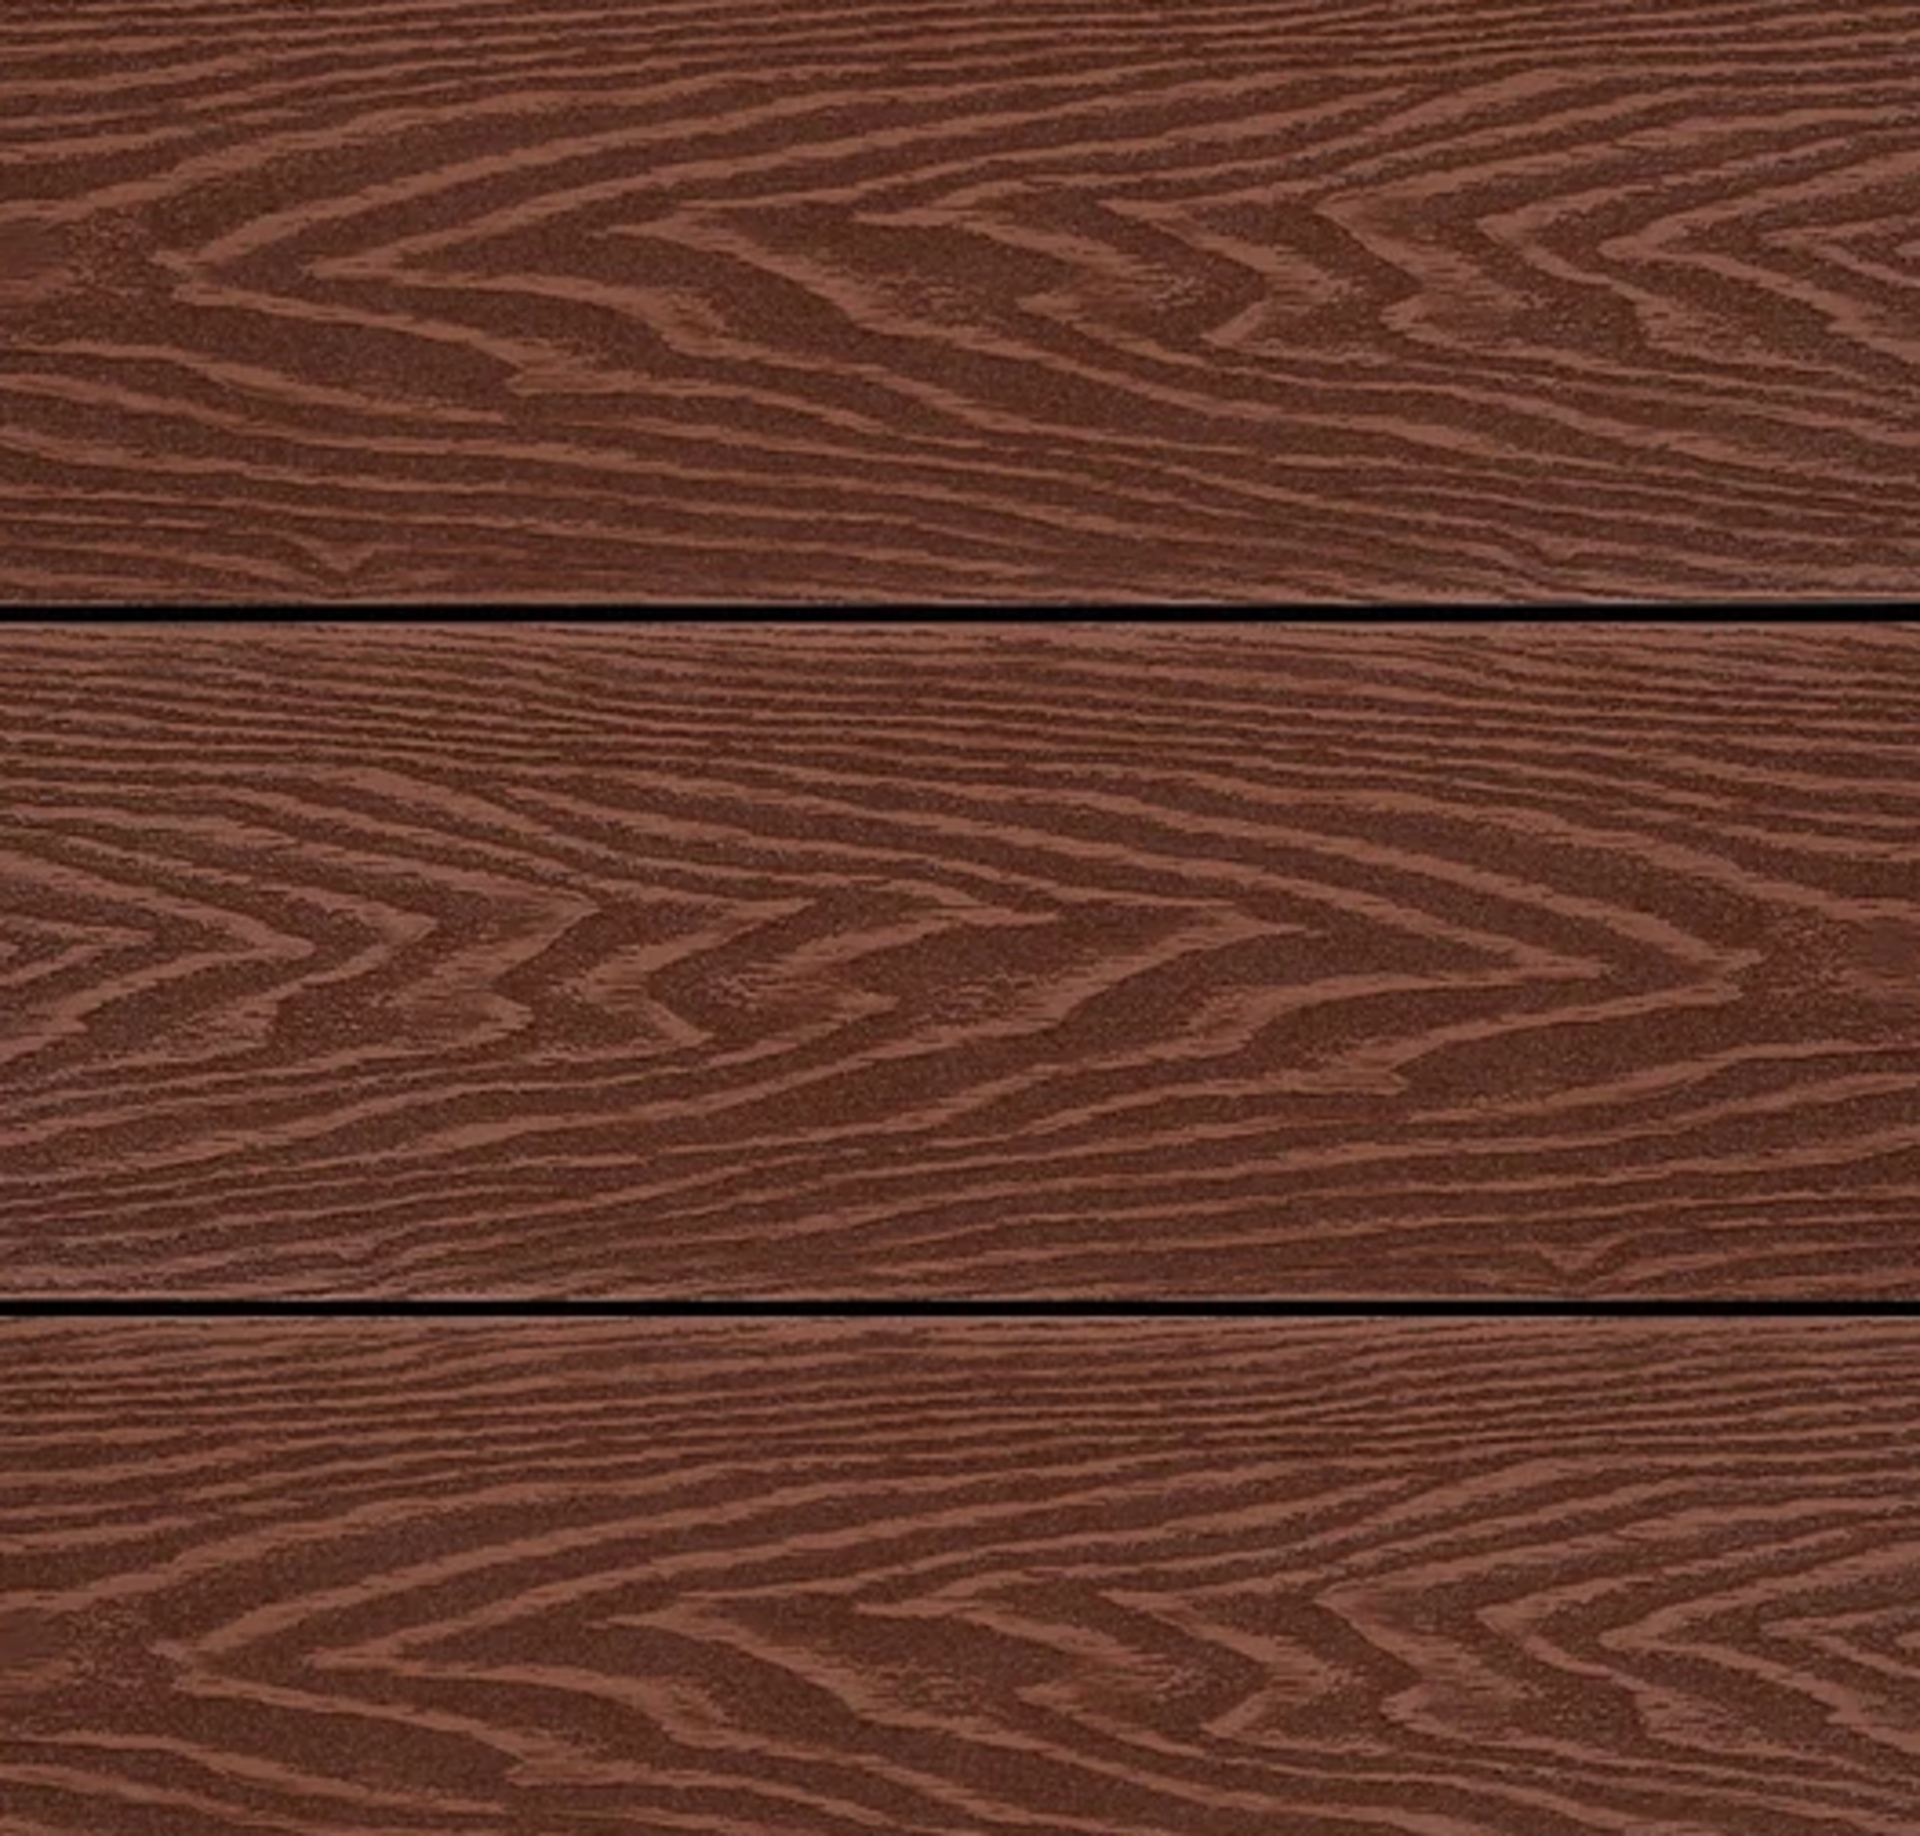 * 20 WPC Composite Coffee Double sided Embossed Woodgrain Decking Boards 2900mm x 146mm x 25mm - Image 2 of 5